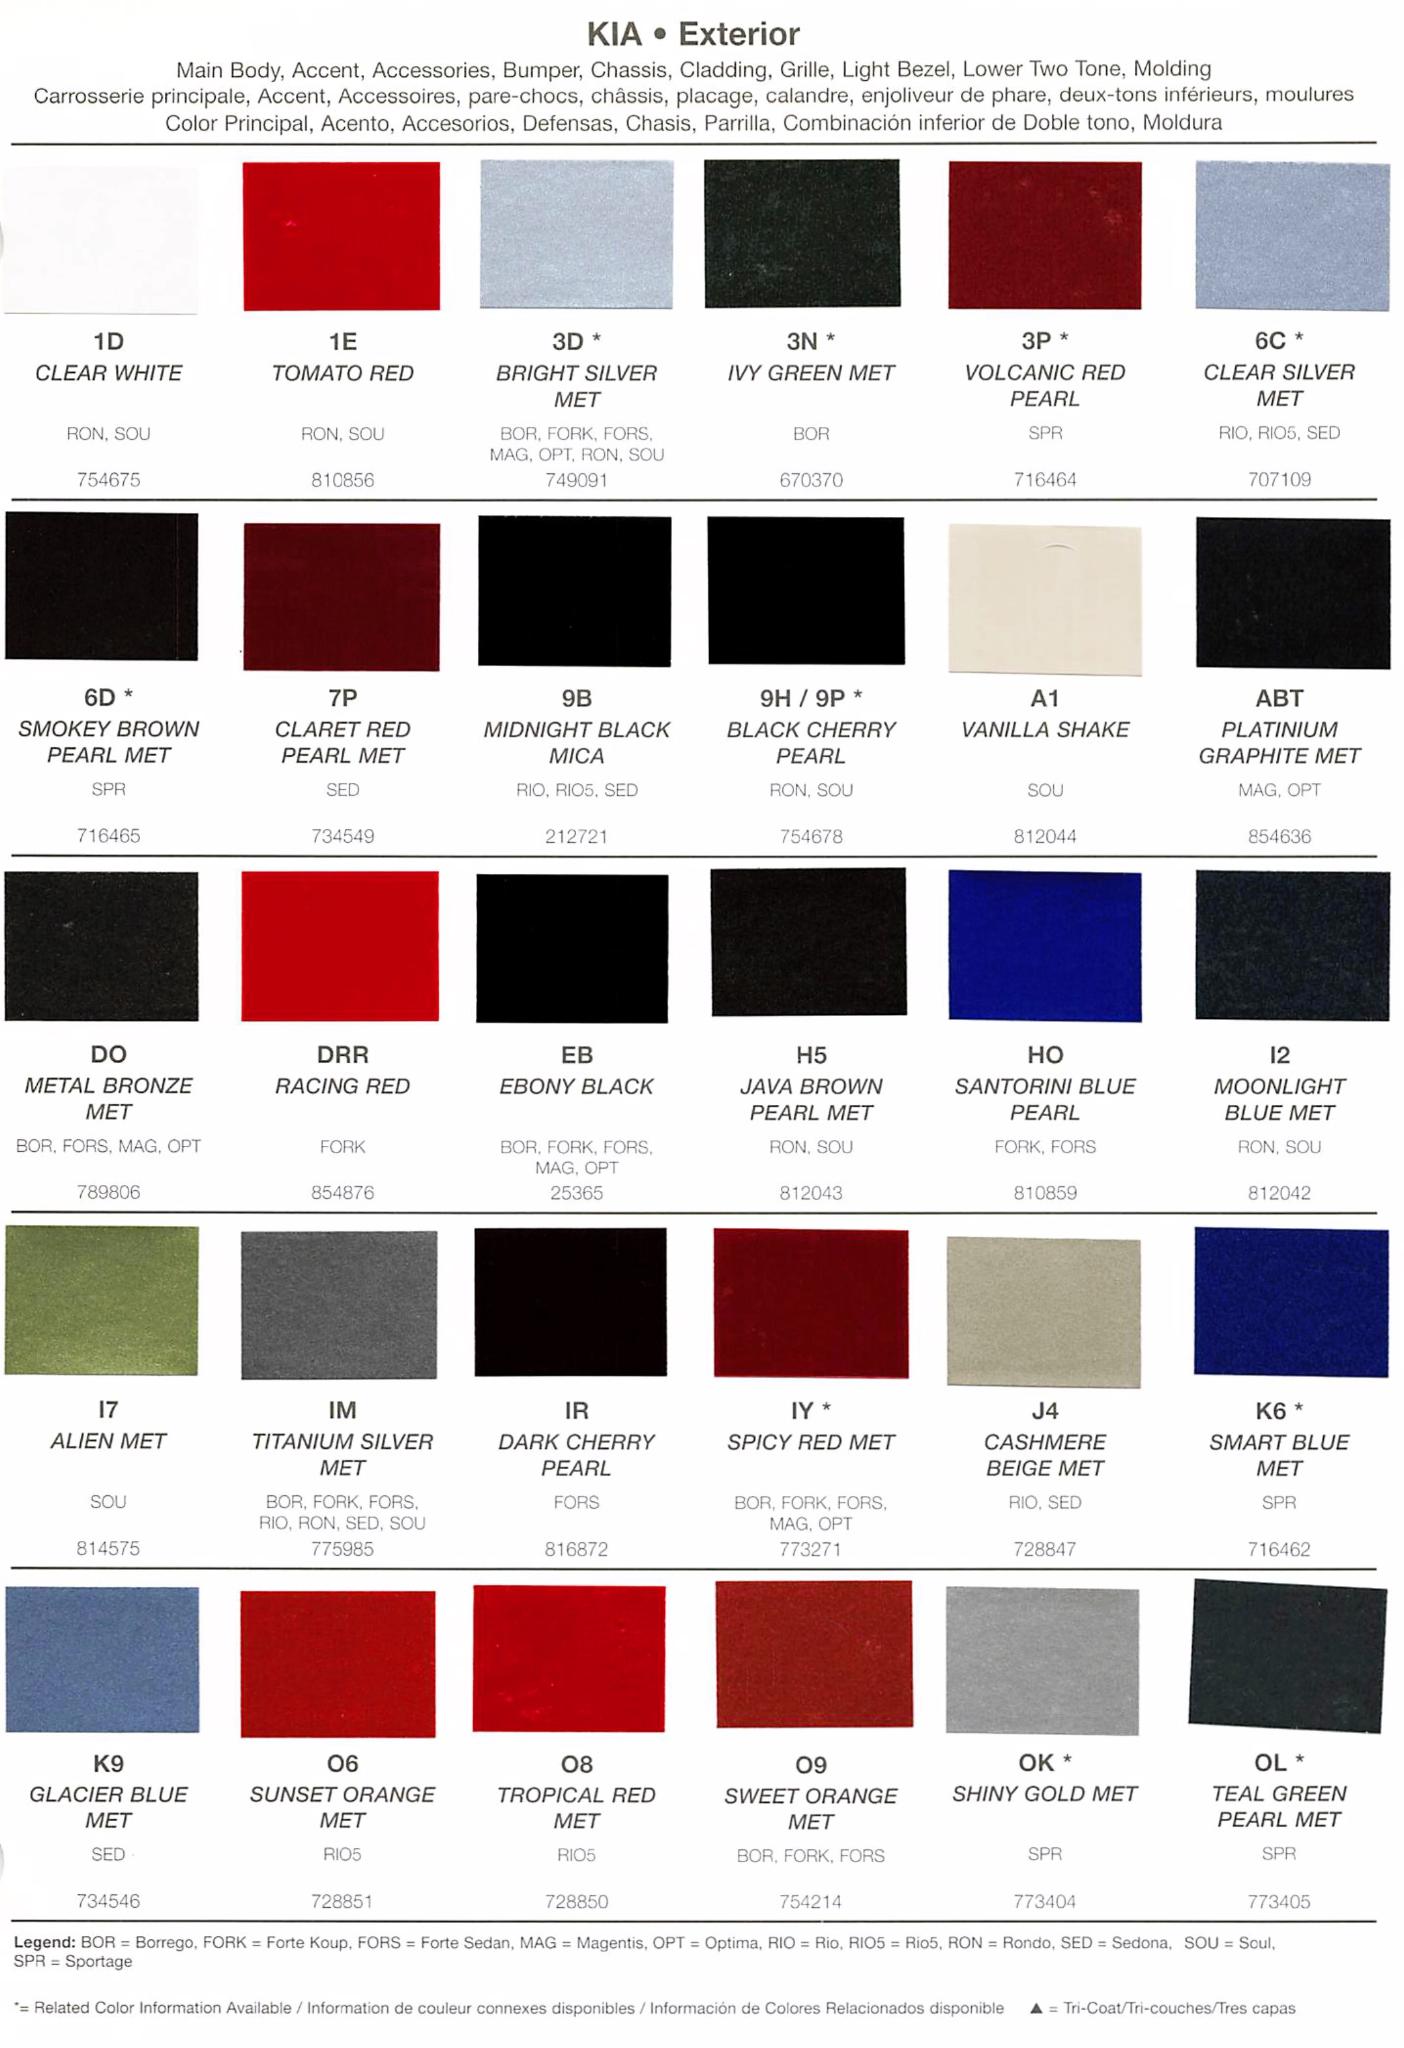 color swatches and codes for various models of kia in 2010